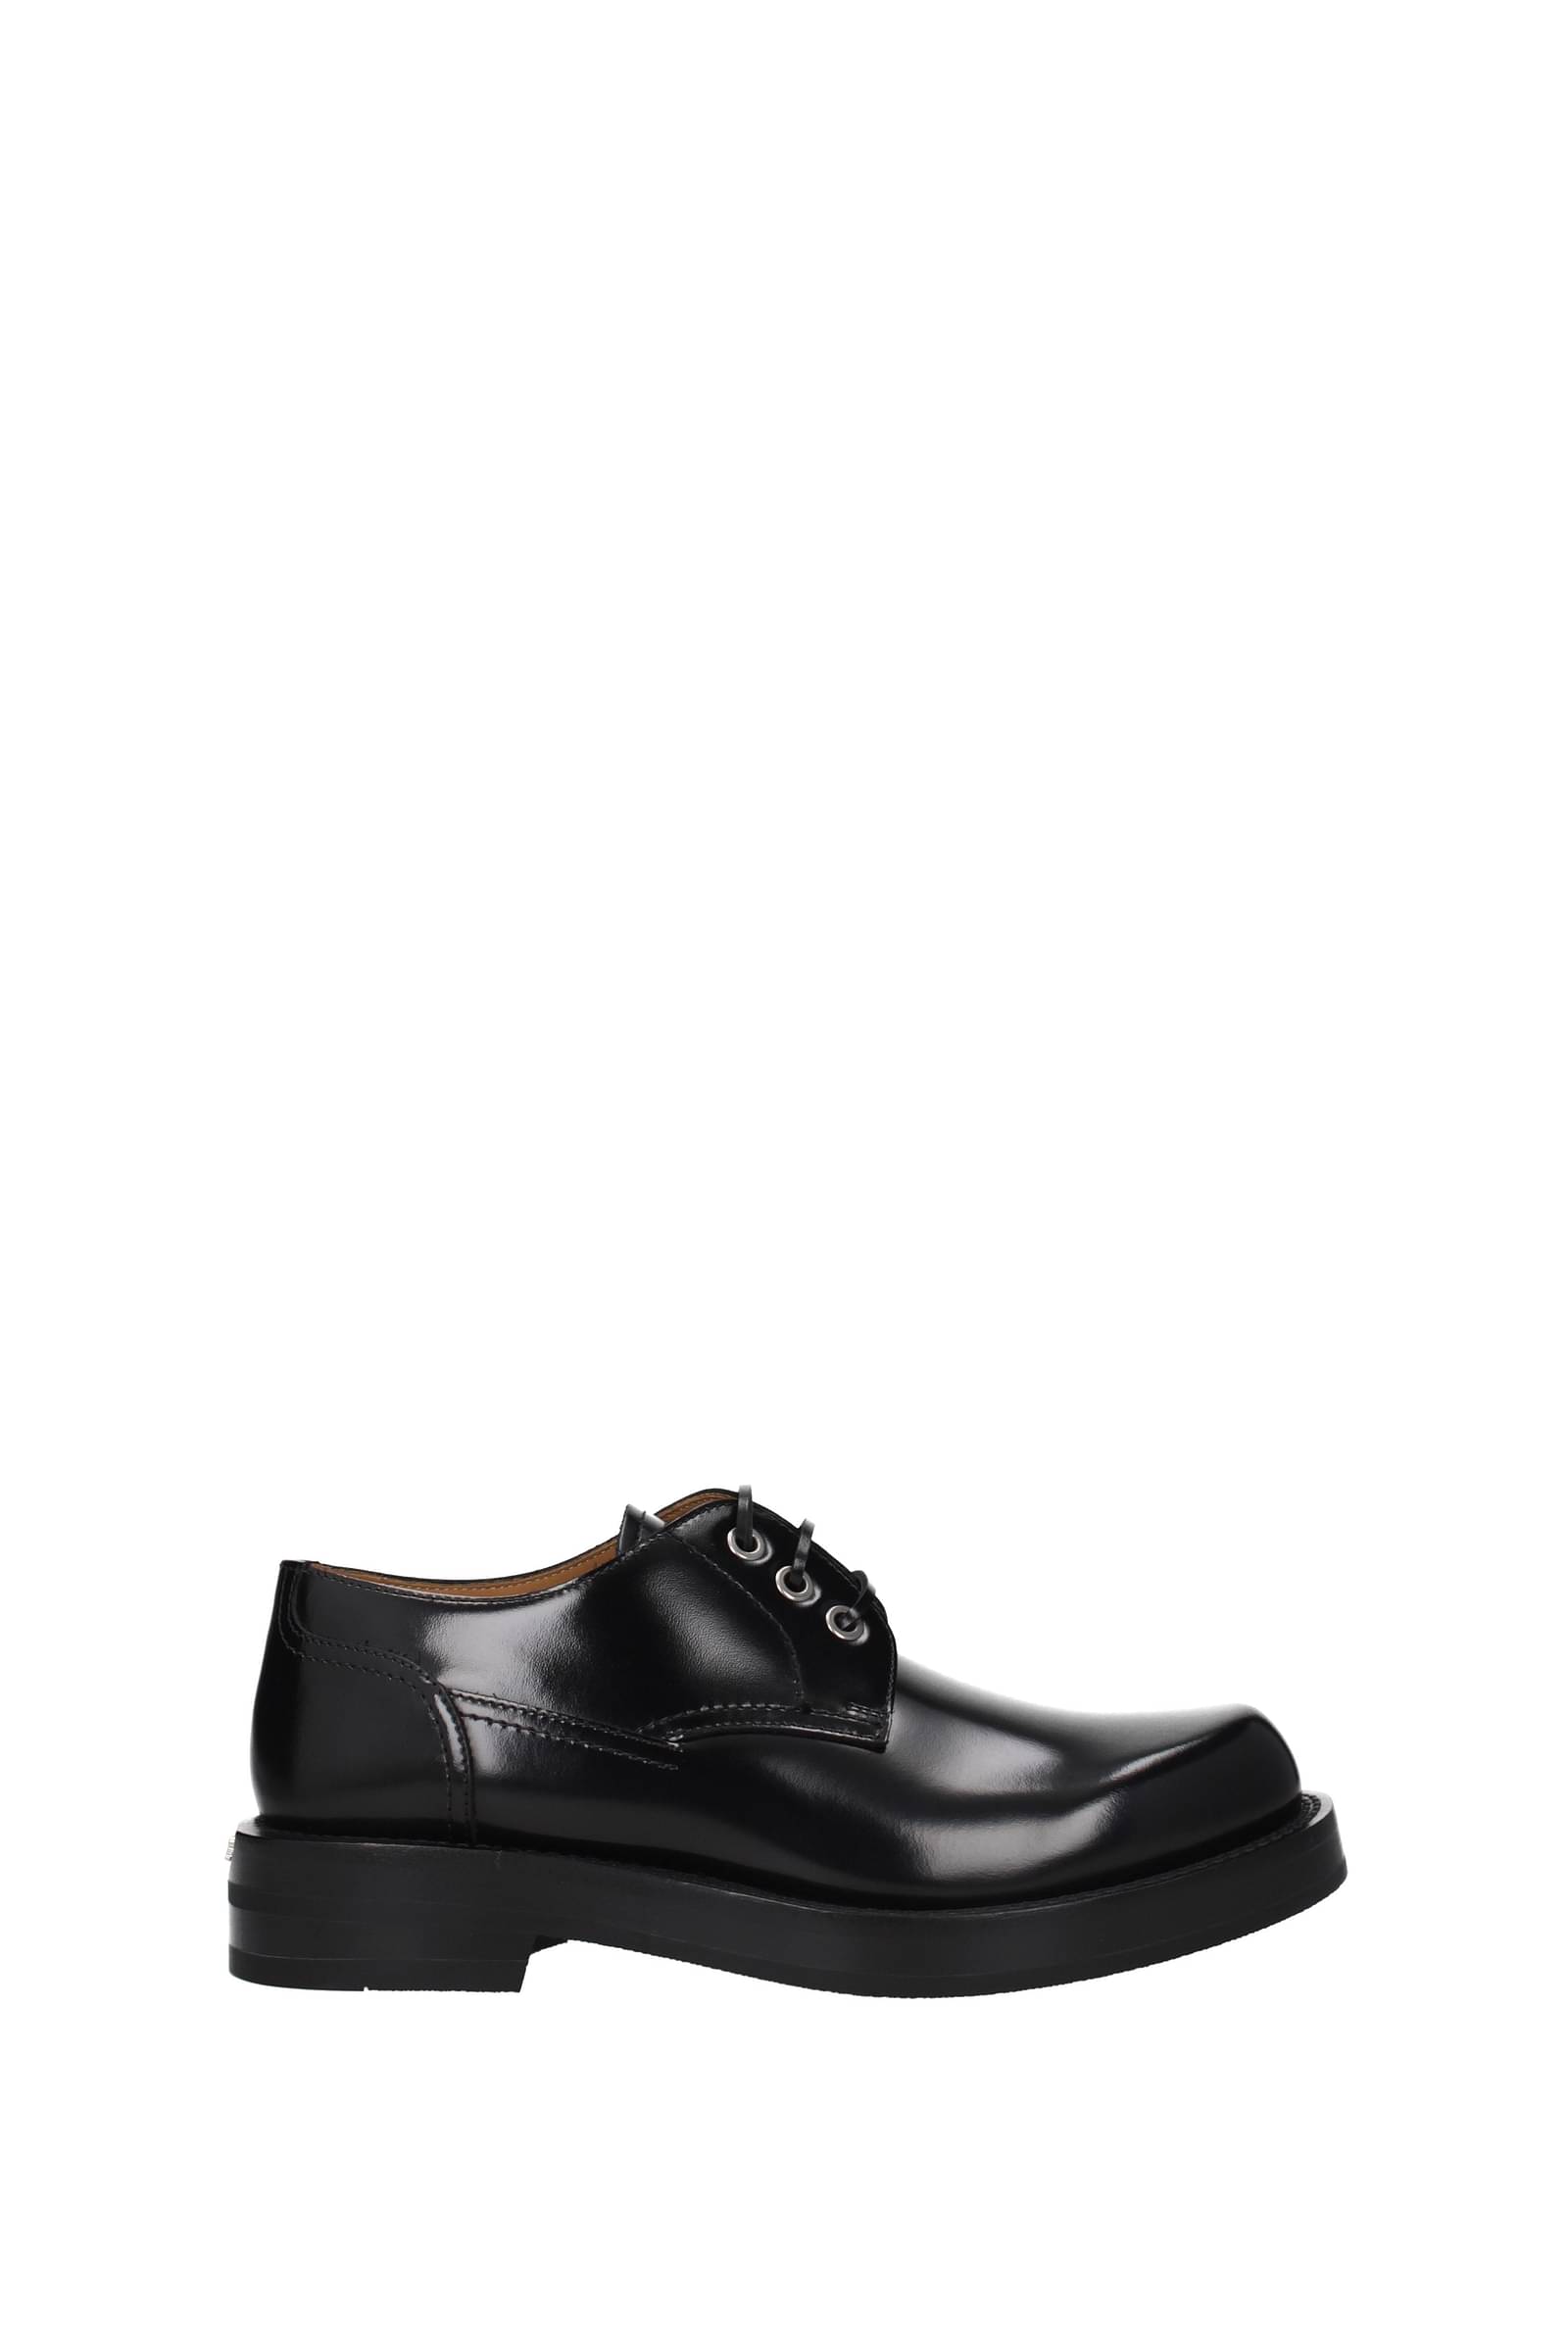 Timeless Derby Shoe Black  Mens Dior Derby Shoes Oxford Loafers   Rincondelamujer